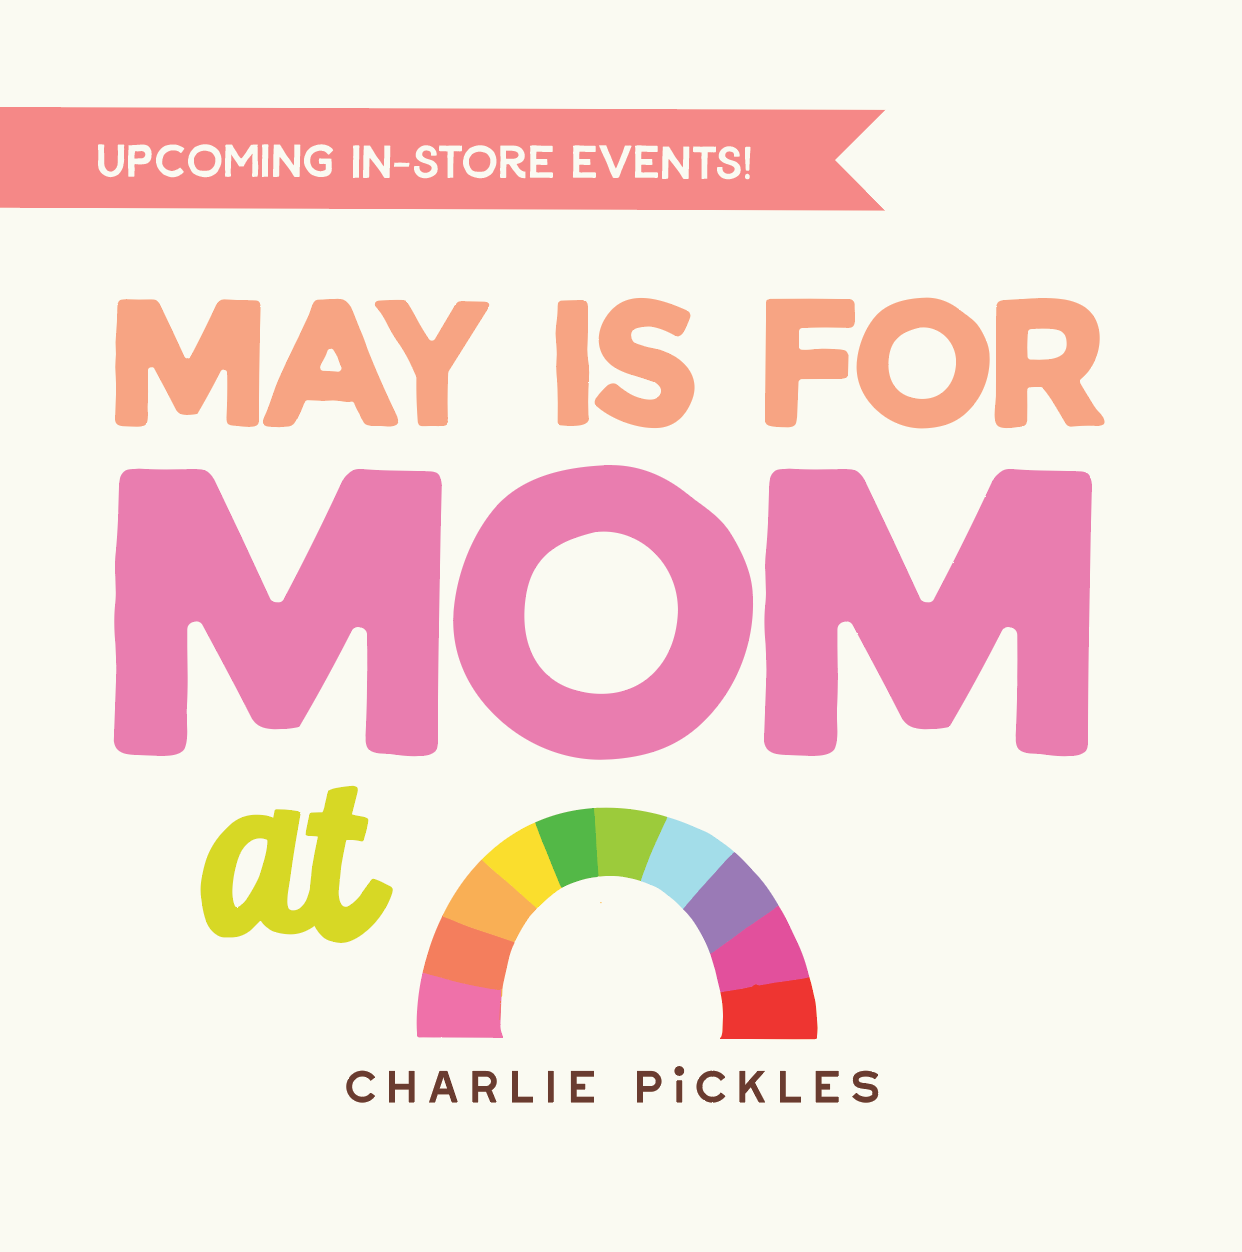 In-Store Mother's Day Events at Charlie Pickles